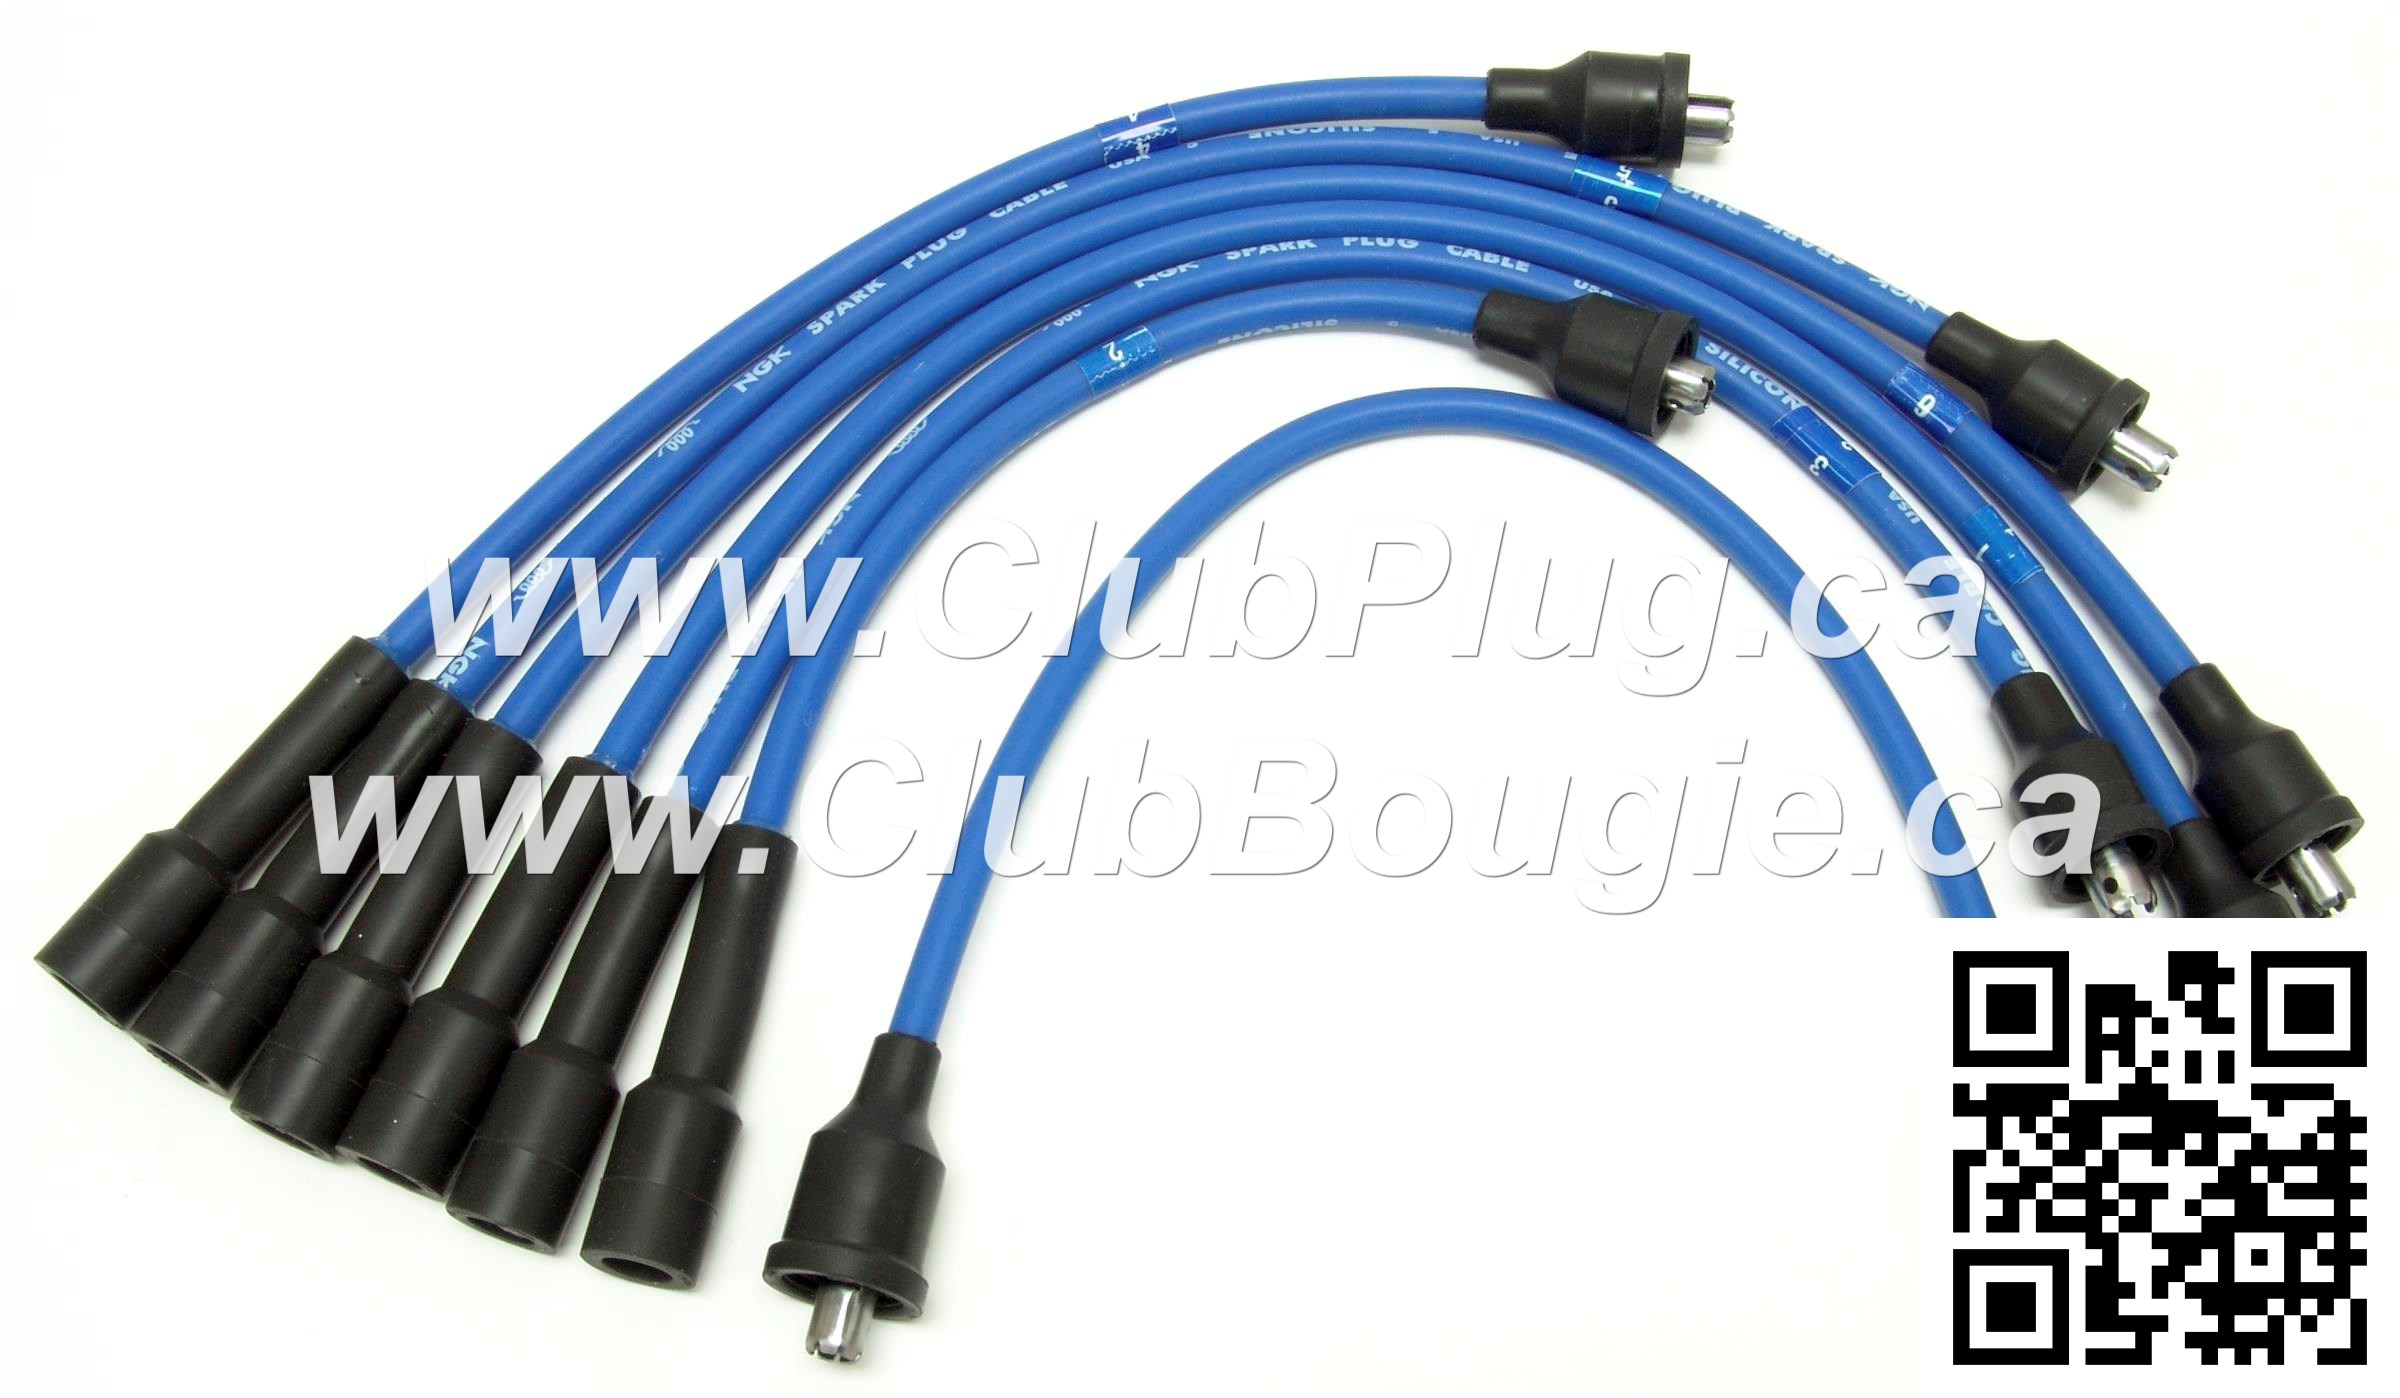 NGK Canada Sprak Plugs, Wire Sets, O2 Sensors, picture